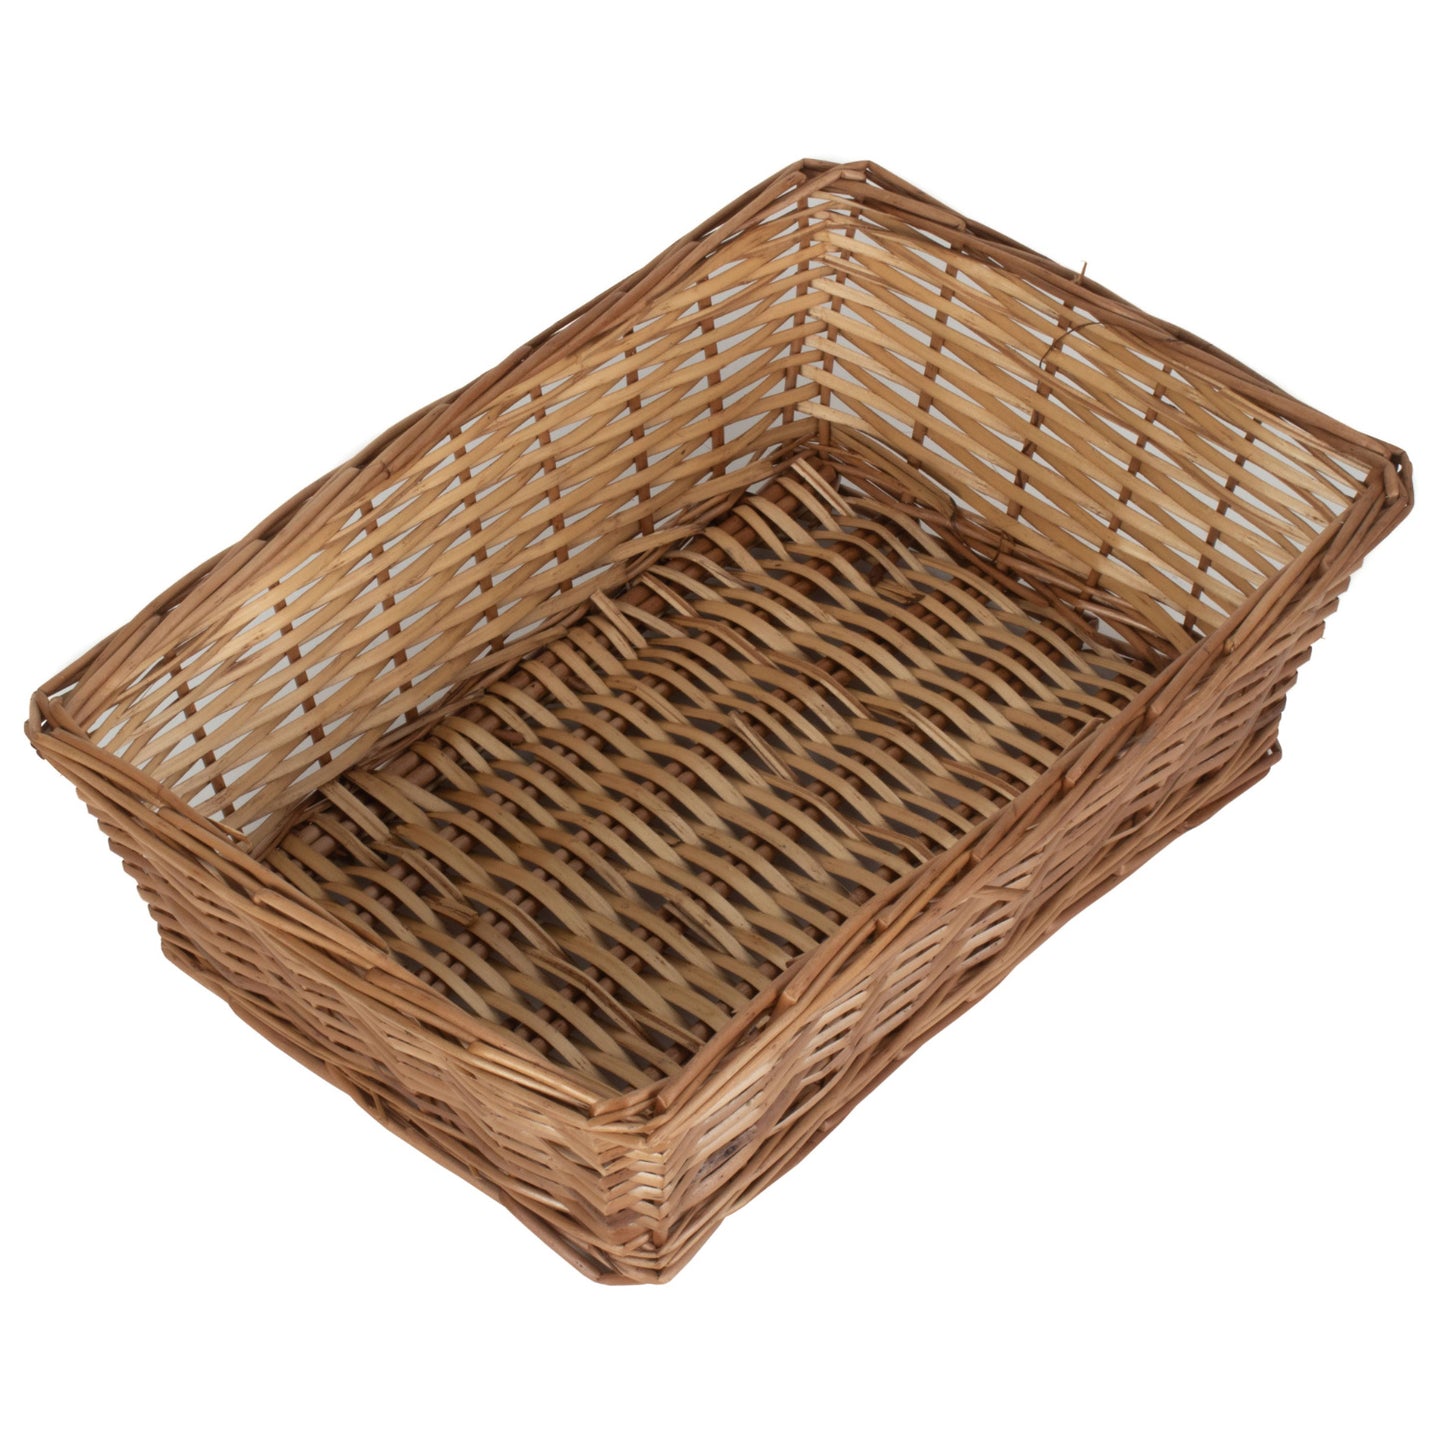 Extra Large Tapered Split Willow Tray